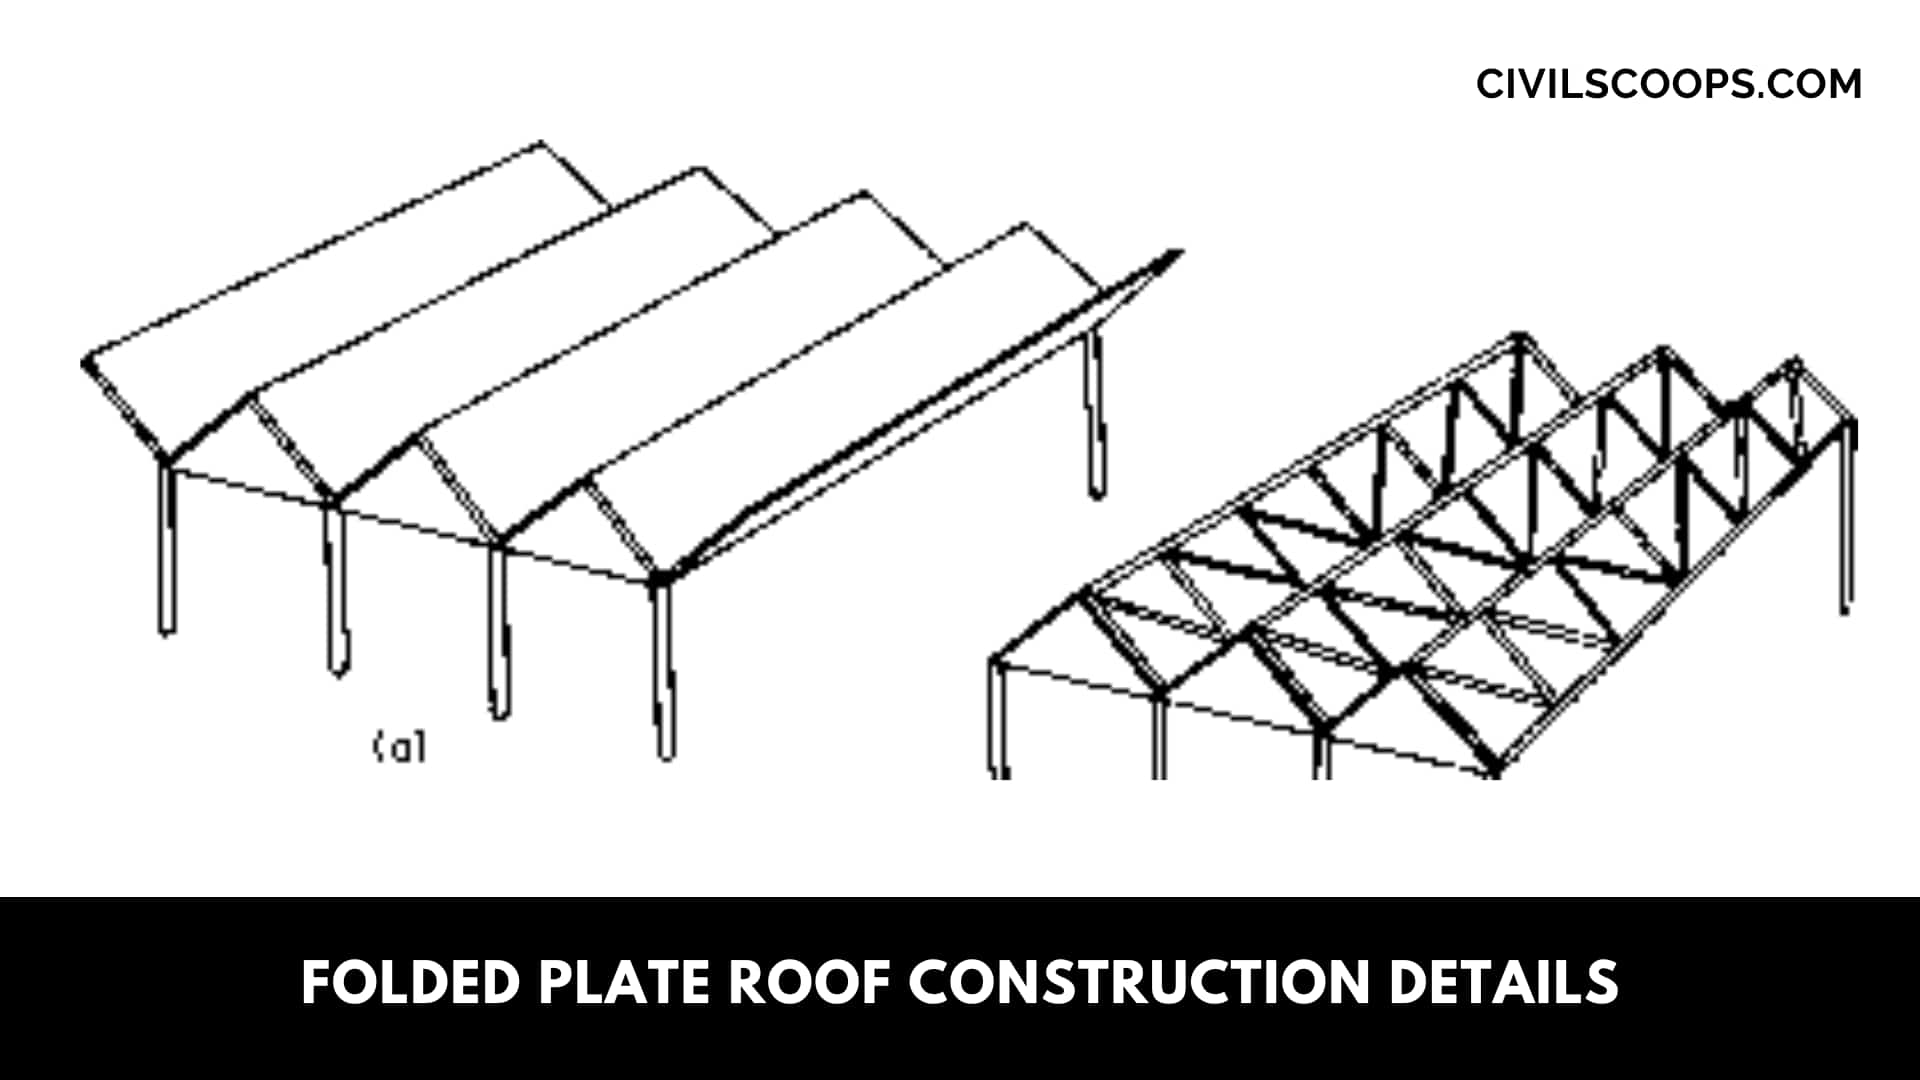 Folded Plate Roof Construction Details